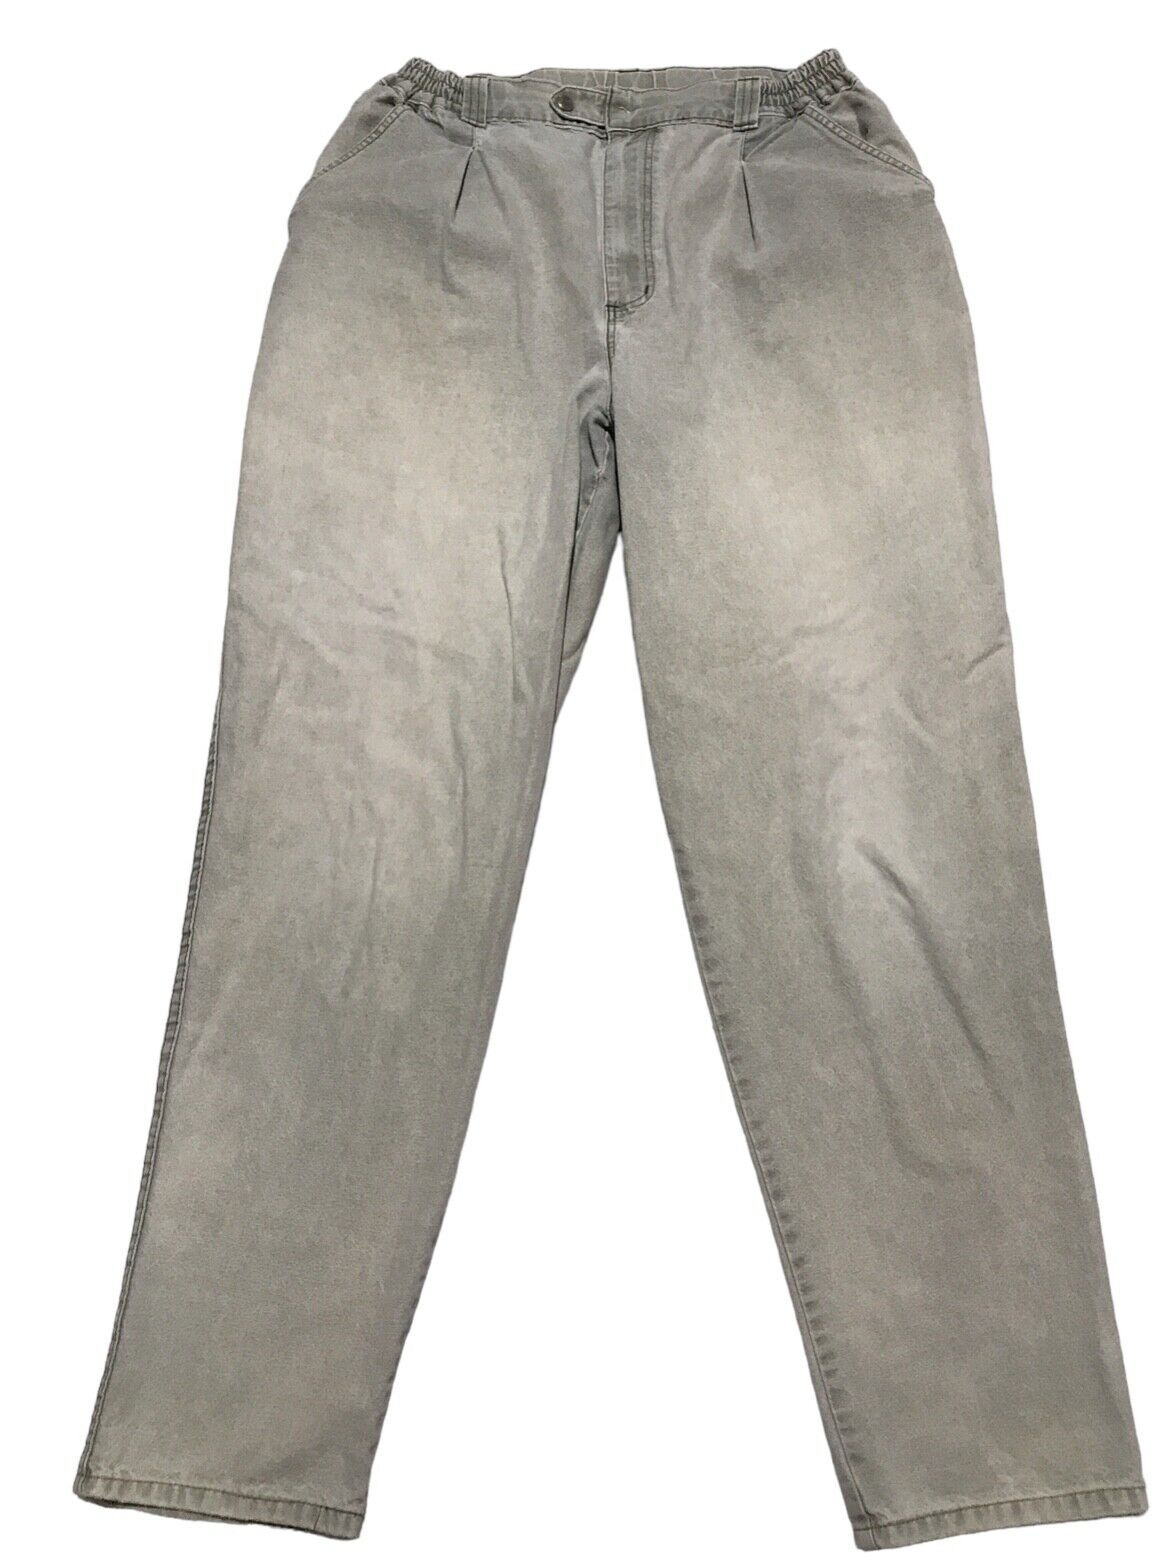 Vintage LL Bean Pants Womens 12 Gray Pathfinder Chino Mom Tapered High Rise 80s